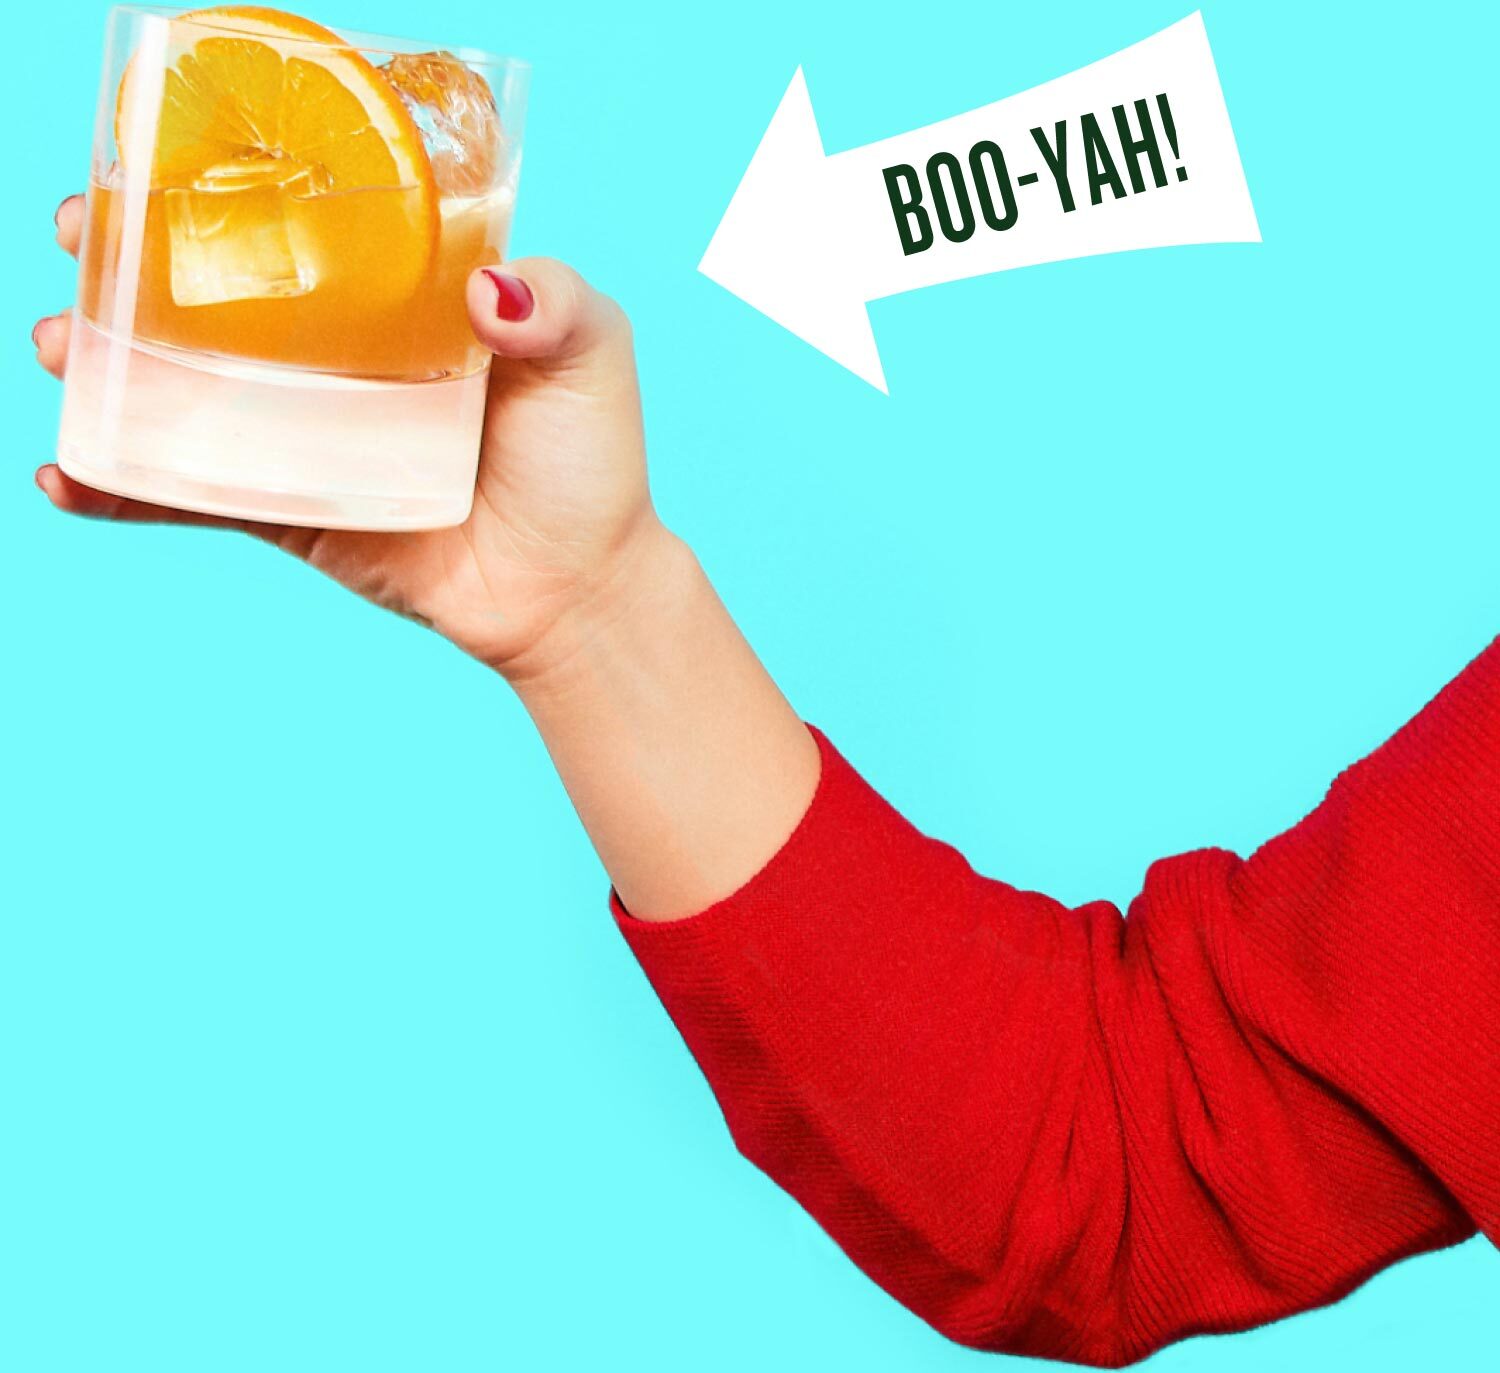 An arm holding a cocktail and an arrow with the text "Boo-yah!" pointing to it